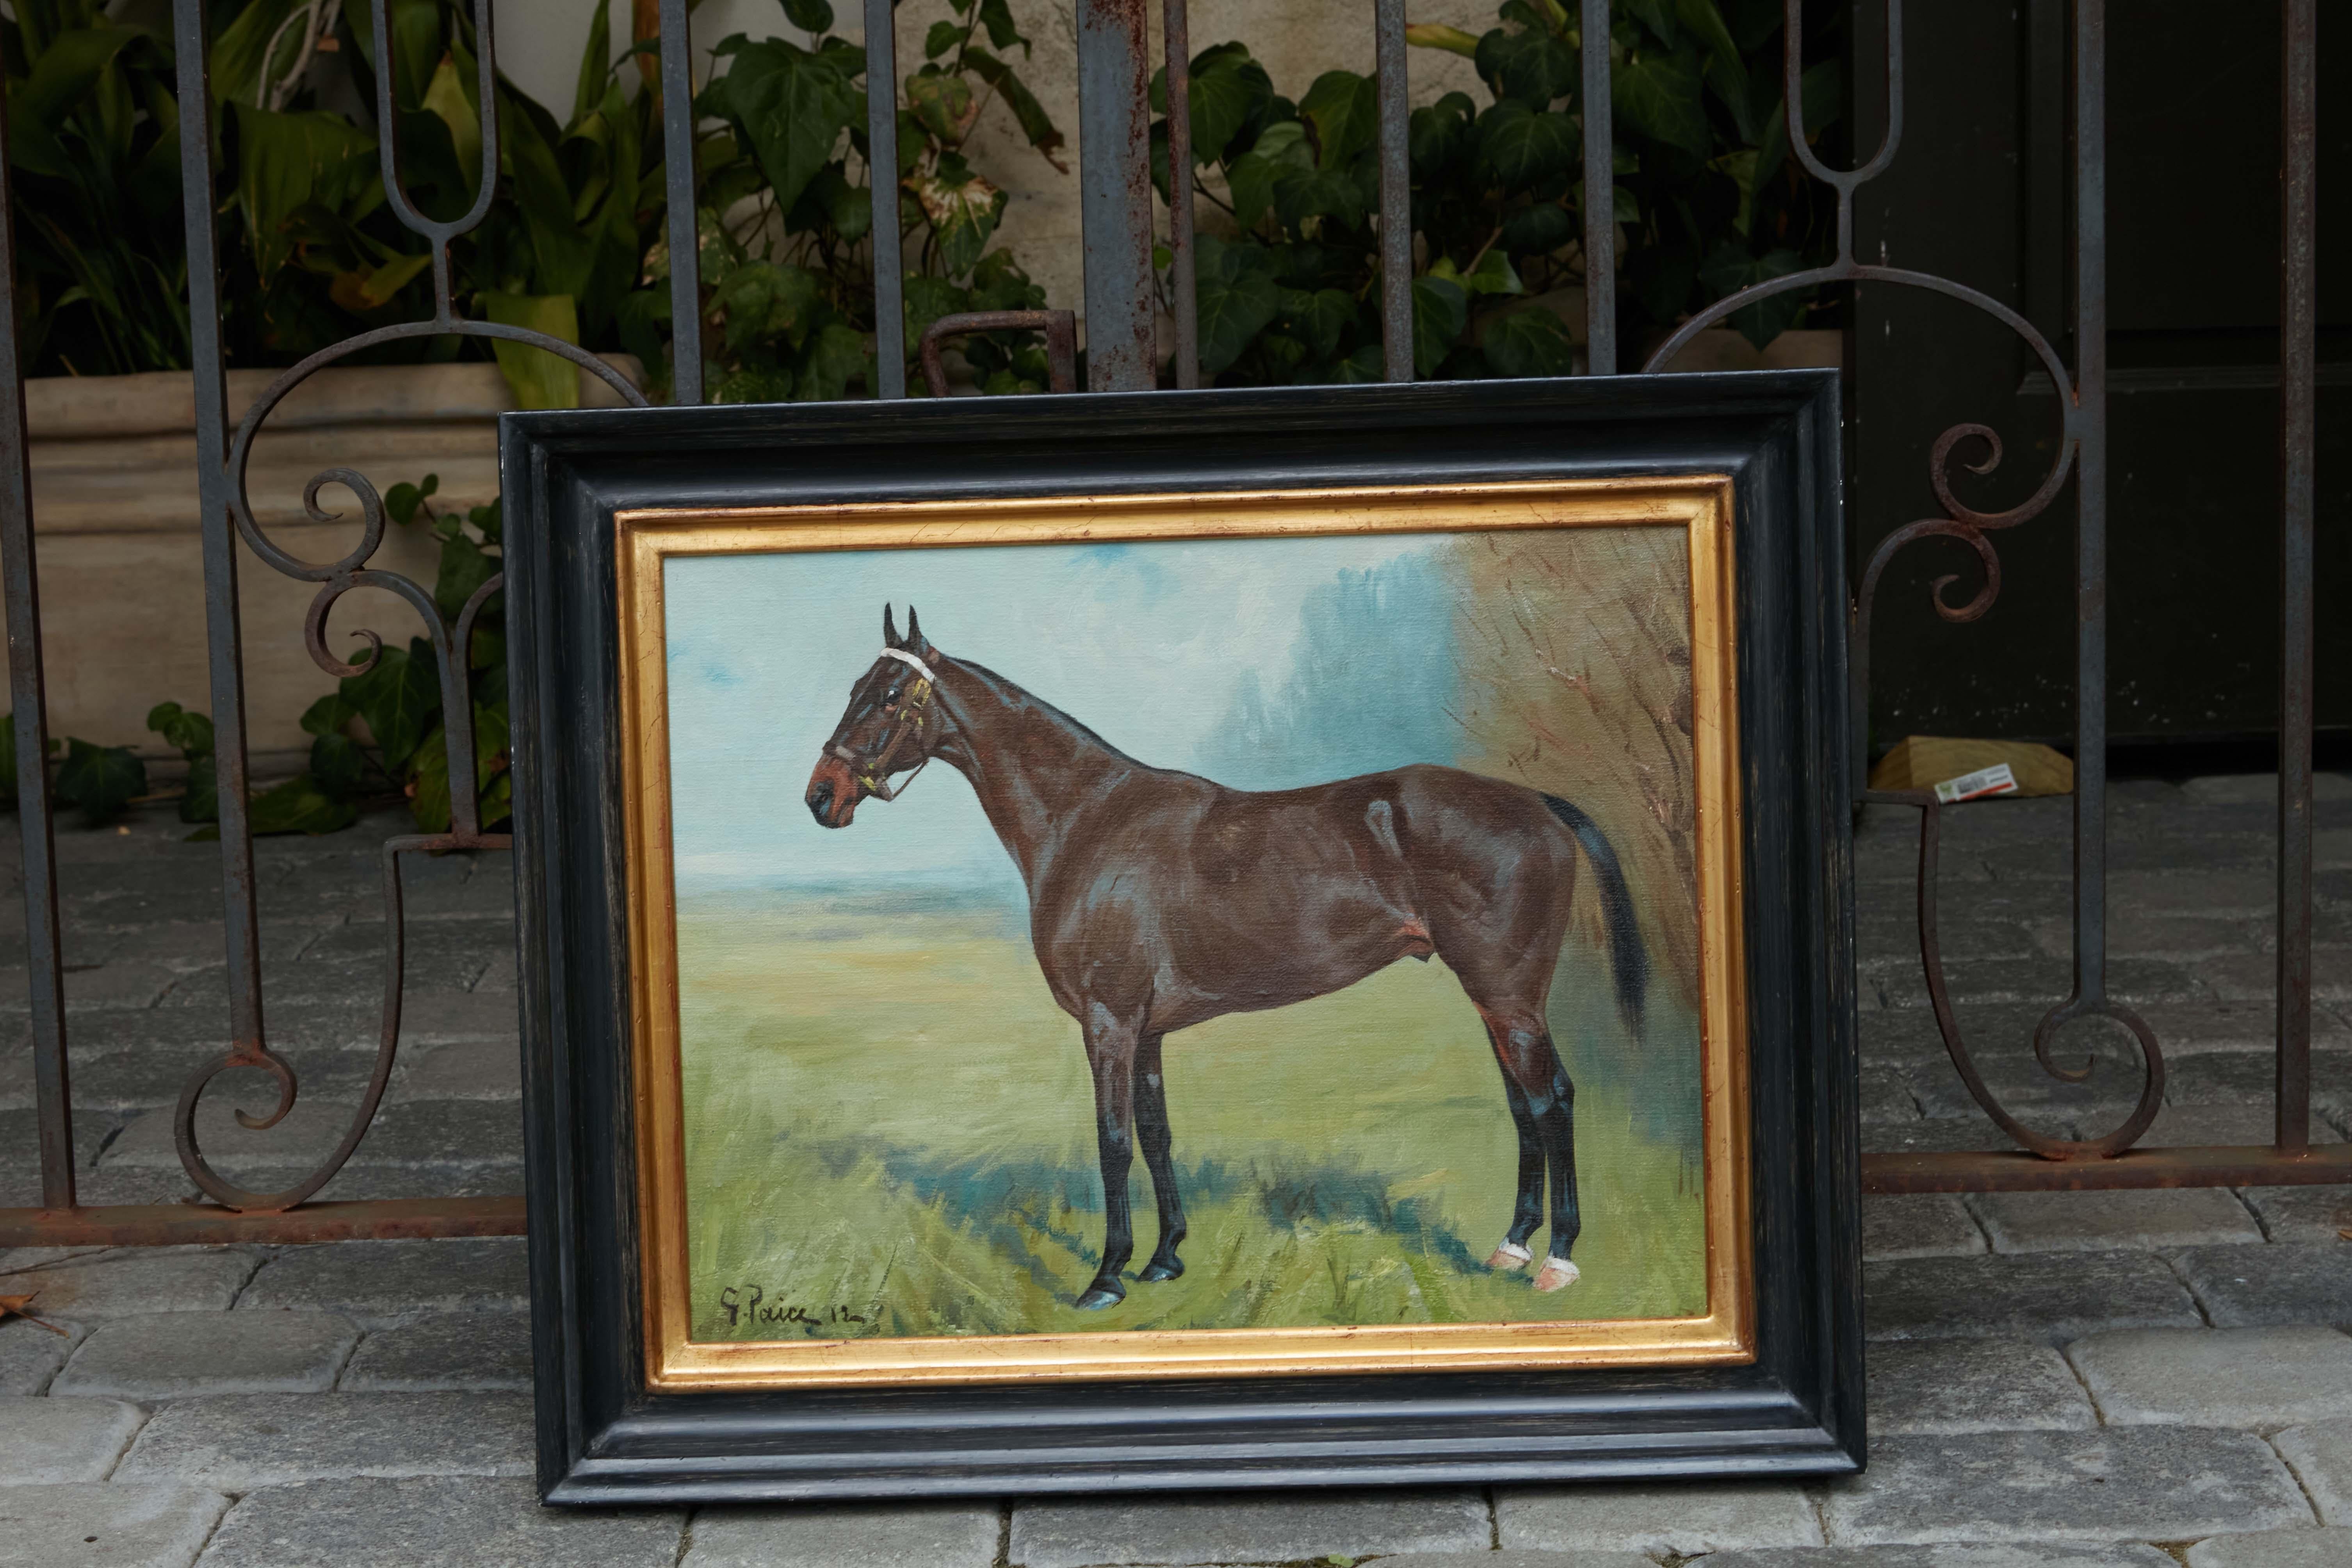 An English oil on canvas equestrian painting from the early 20th century signed George Paice (1854-1925), depicting a horse standing in a field, in a new custom black frame. Created in the early years of the 20th century by British painter George